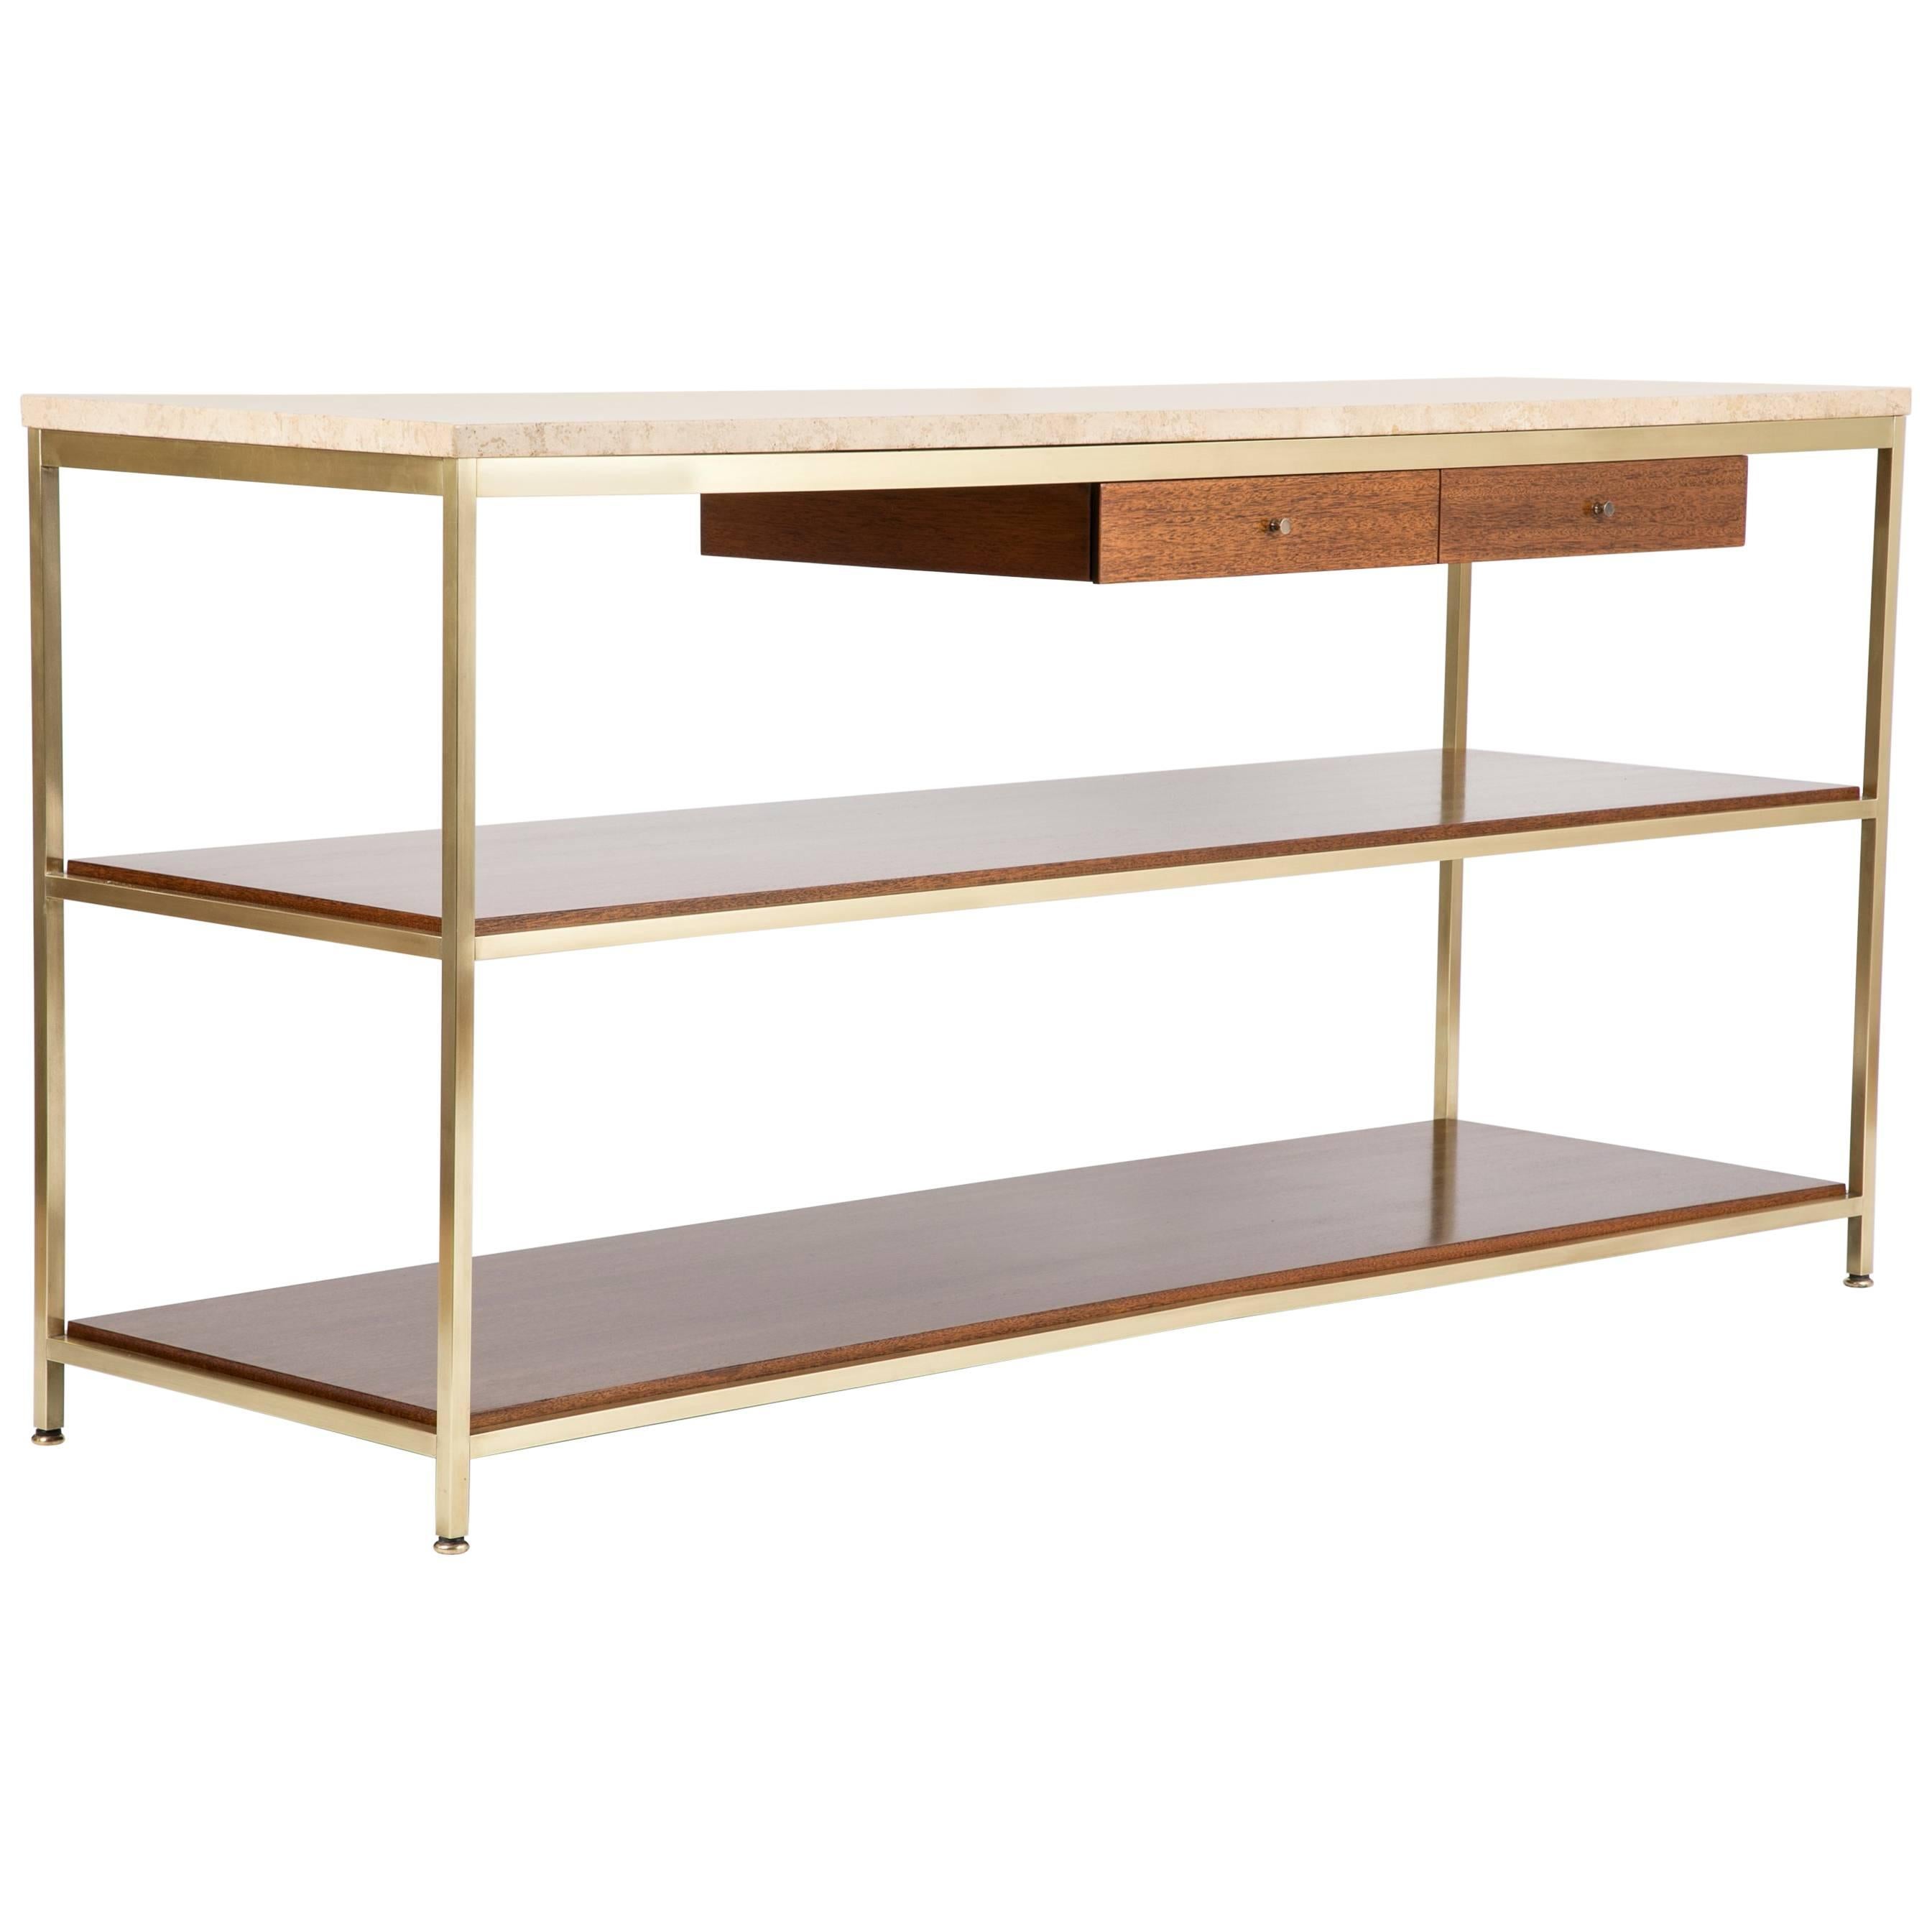 Midcentury Brass and Travertine Marble-Top Console Designed by Paul McCobb